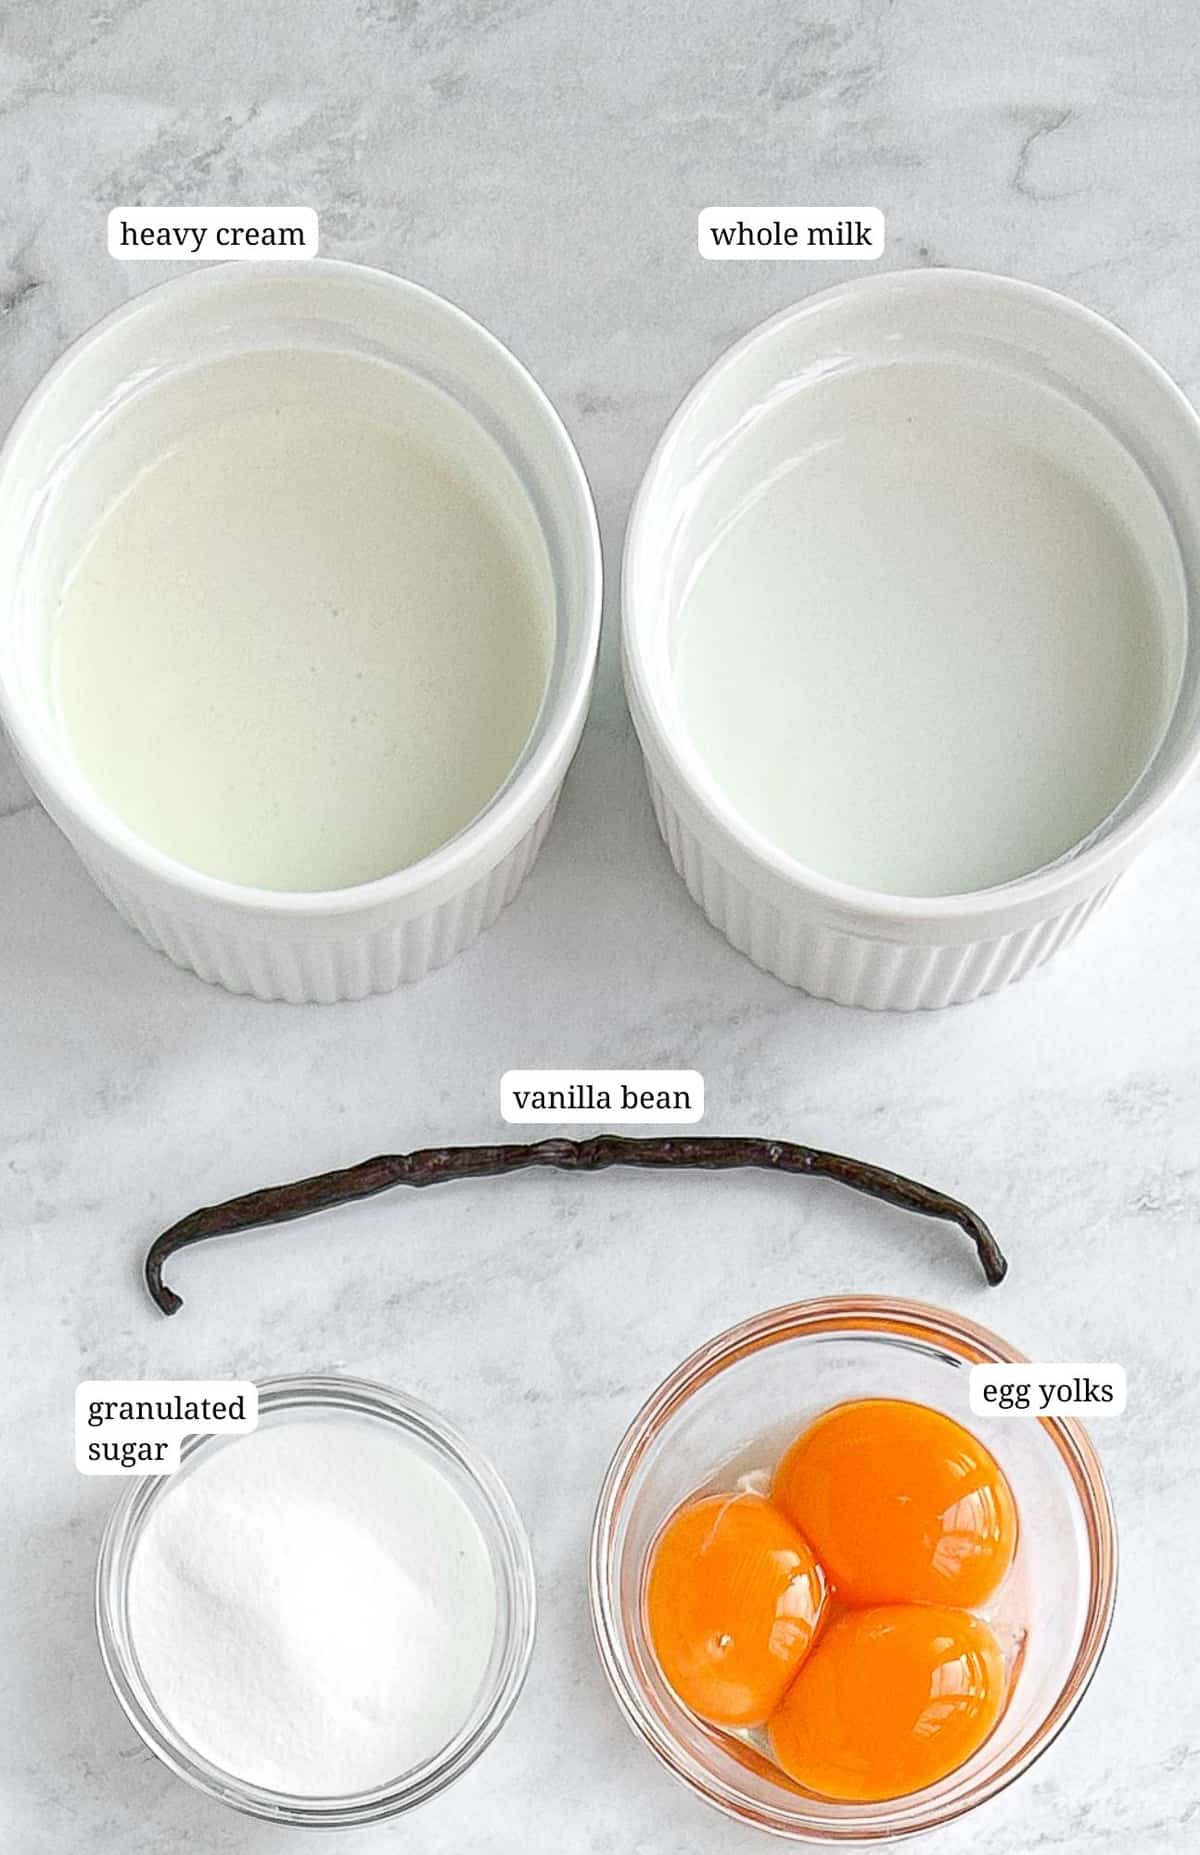 Label image of ingredients needed to make blender crème anglaise.